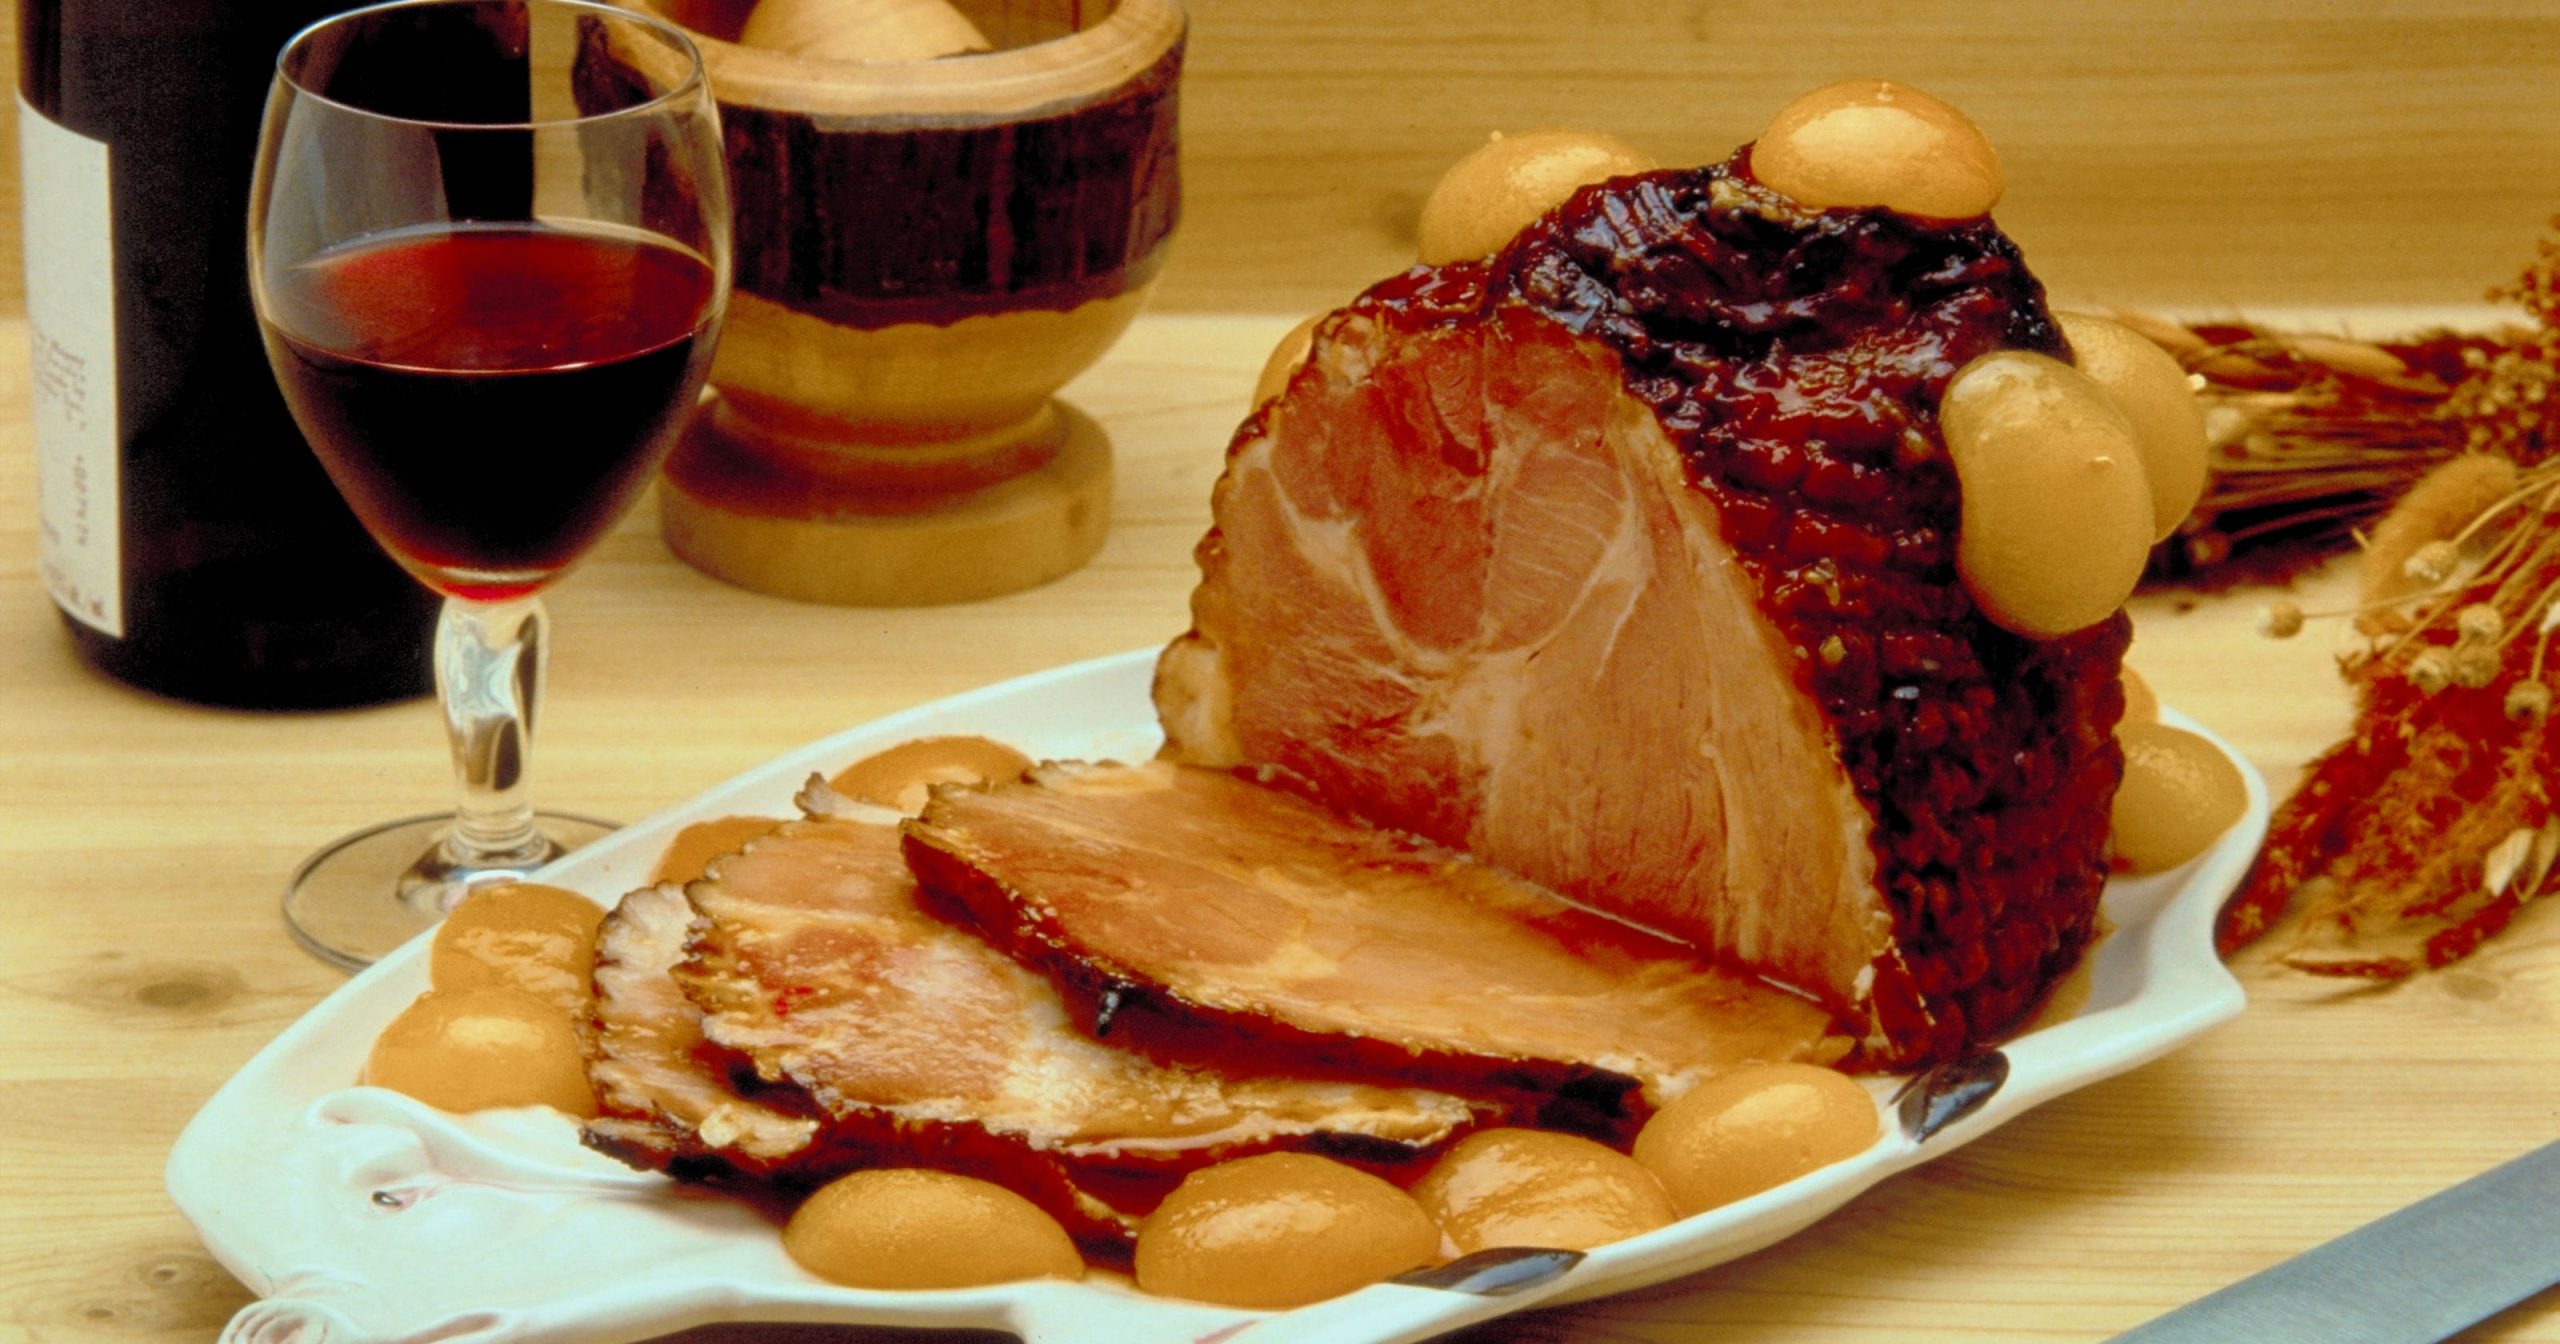 Wine pairings: Deciphering what to serve with ham